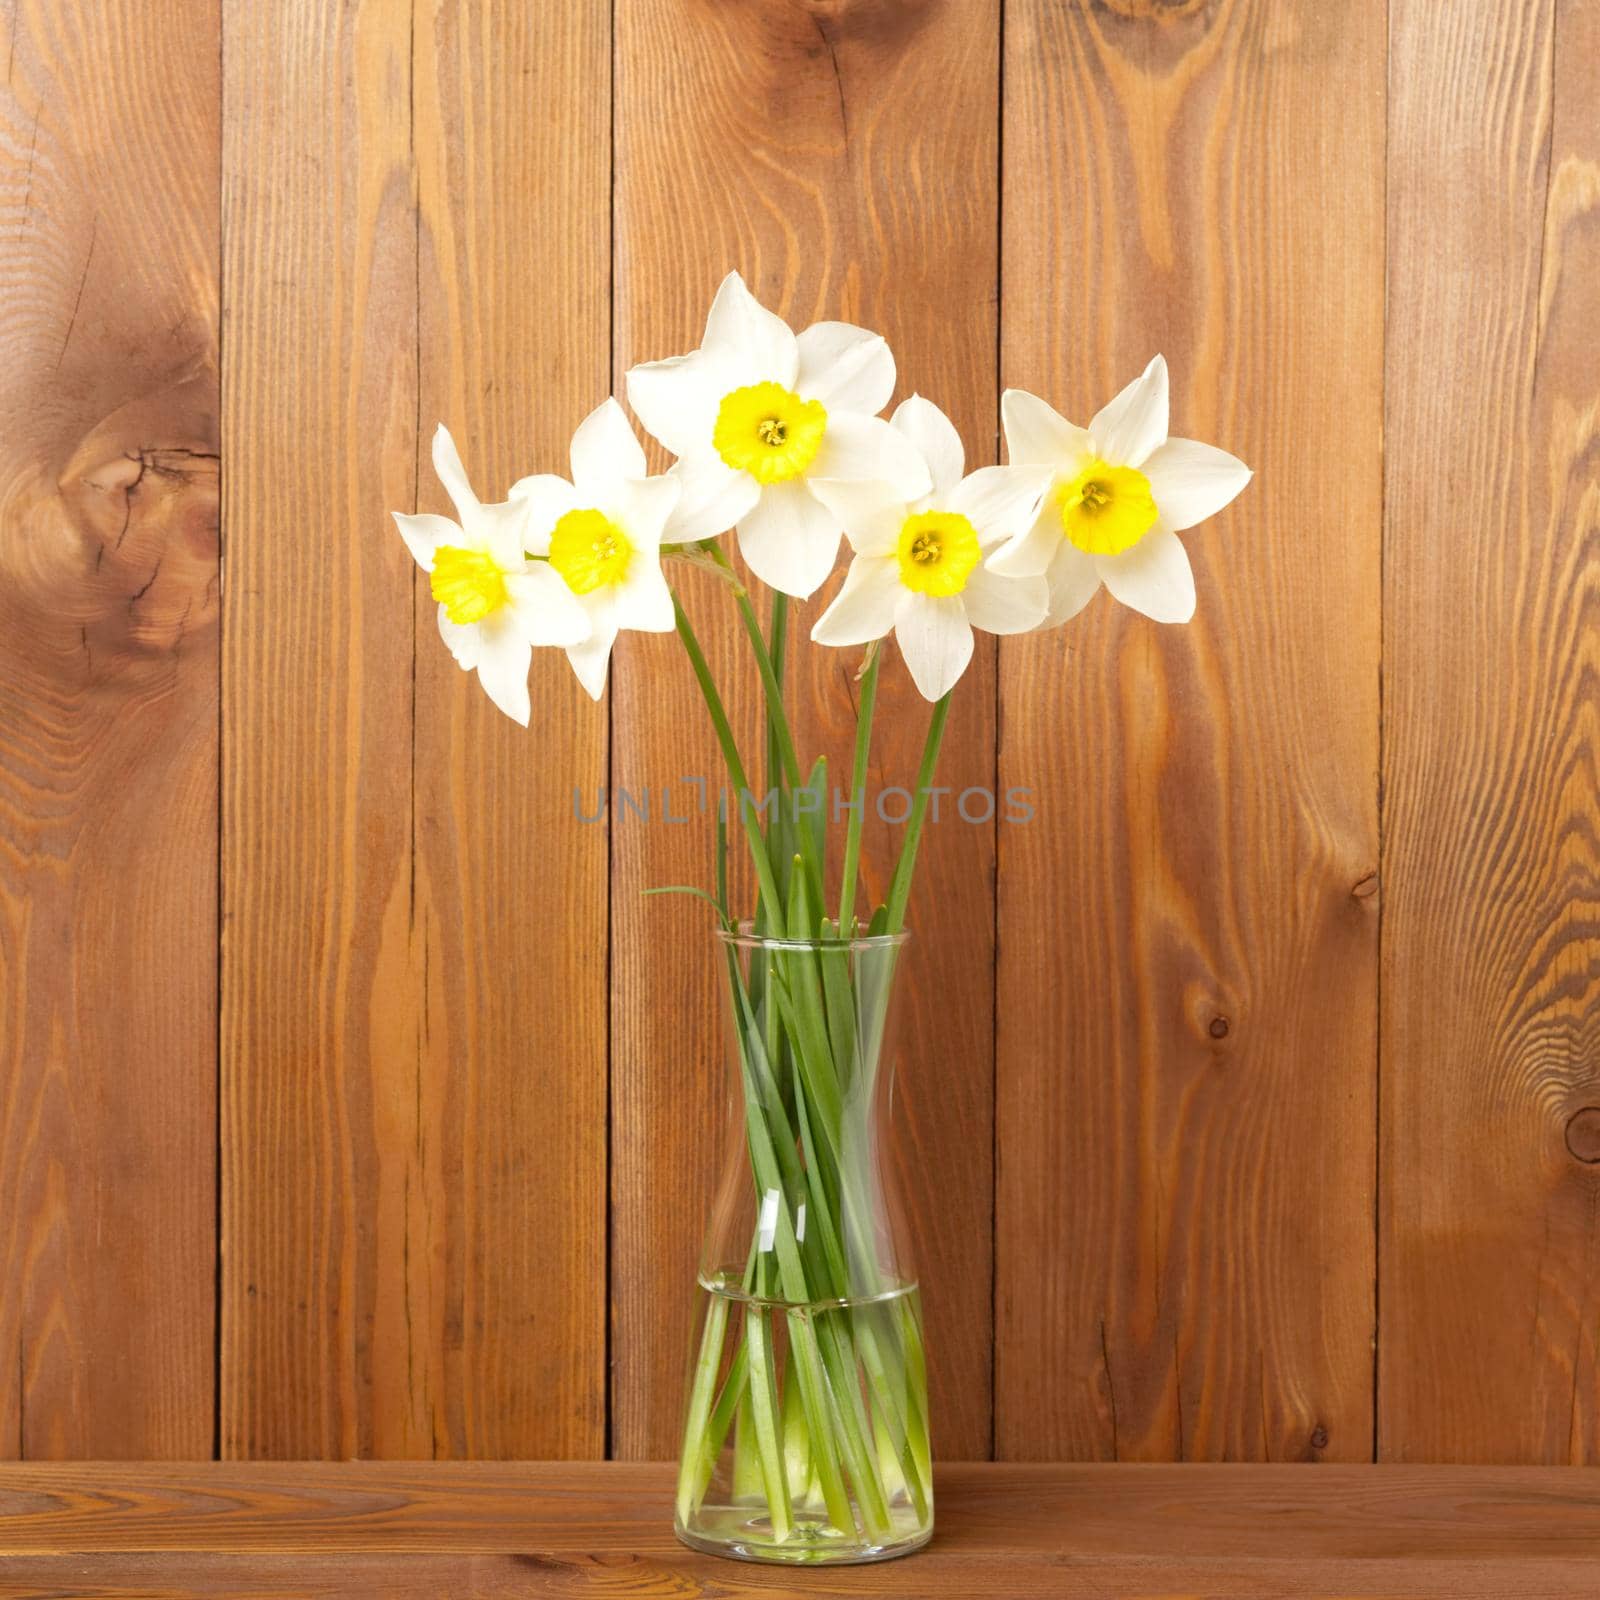 Bouquet of fresh flowers, daffodils in vase in middle of wooden table, opposite brown wooden wall. Empty space for text. by NataBene